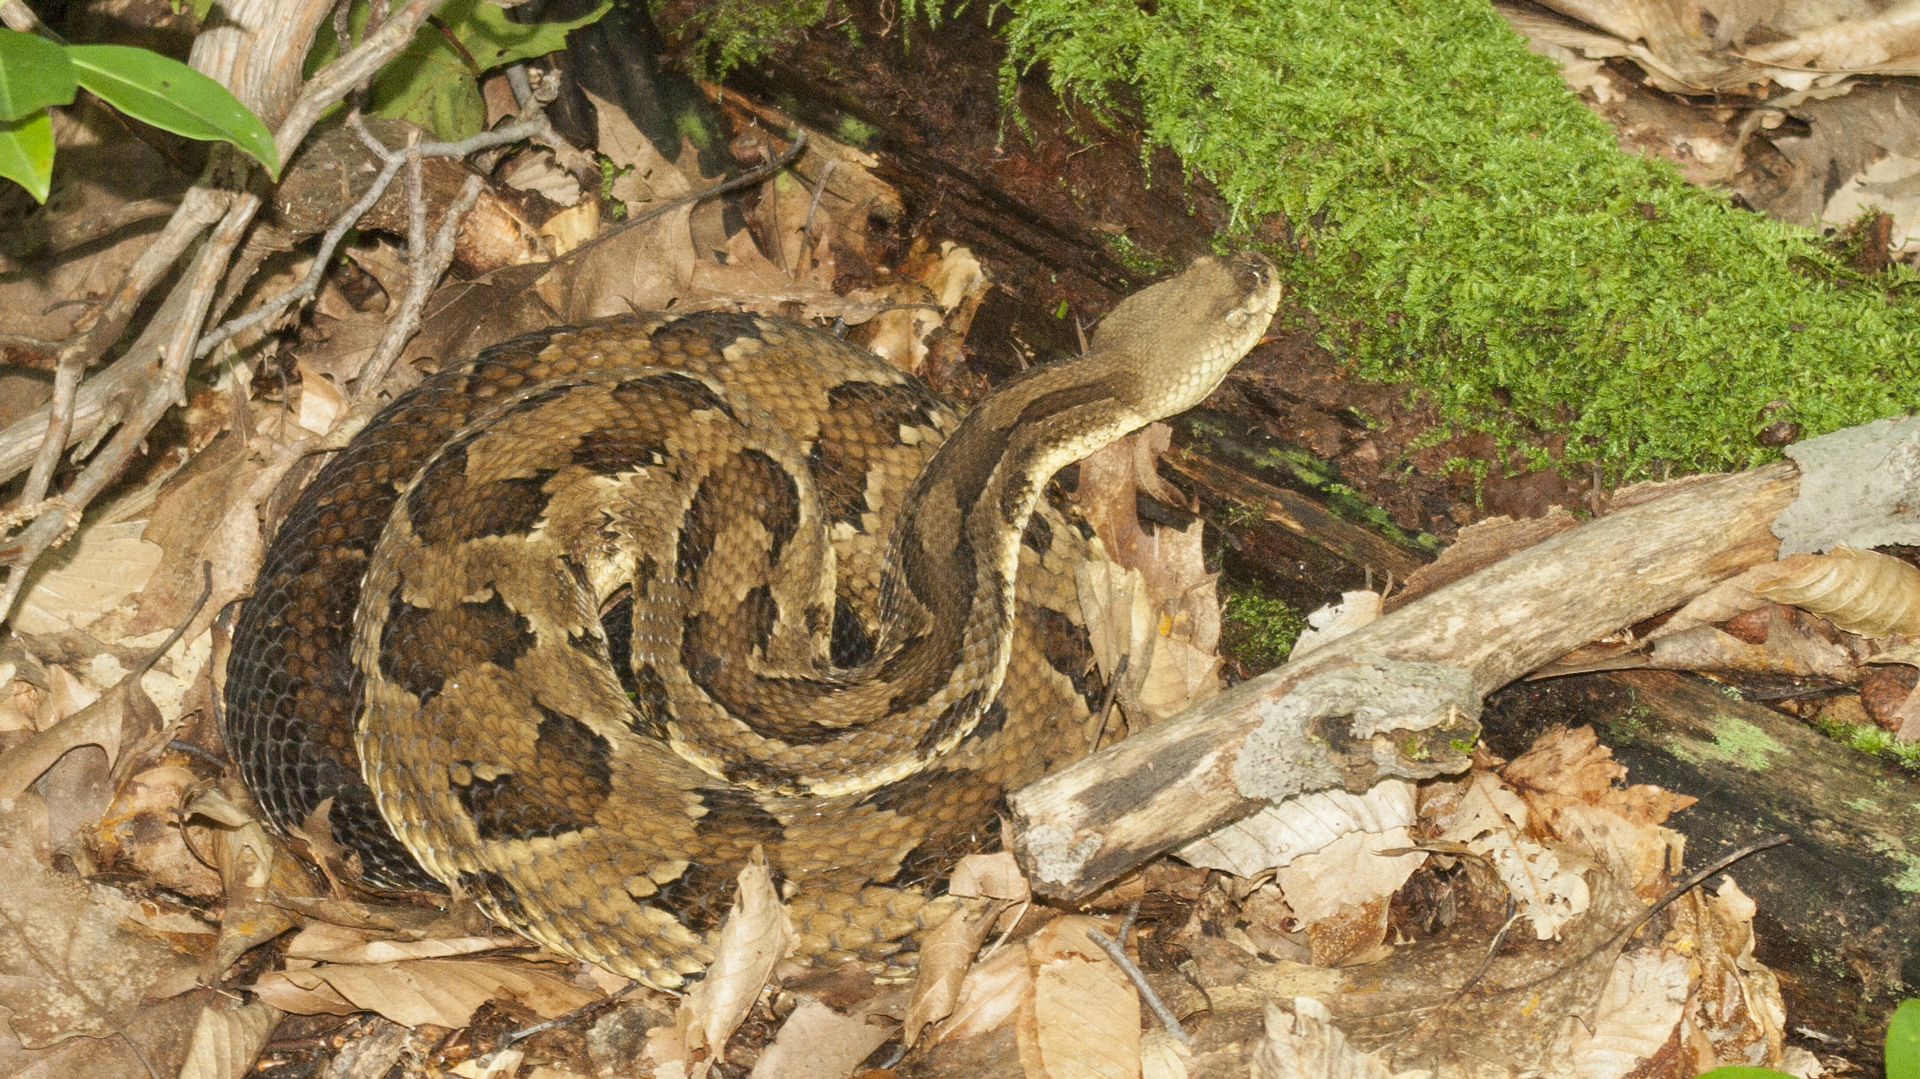 Rattlesnake Conservation: Why These Snakes Matter and How to Help